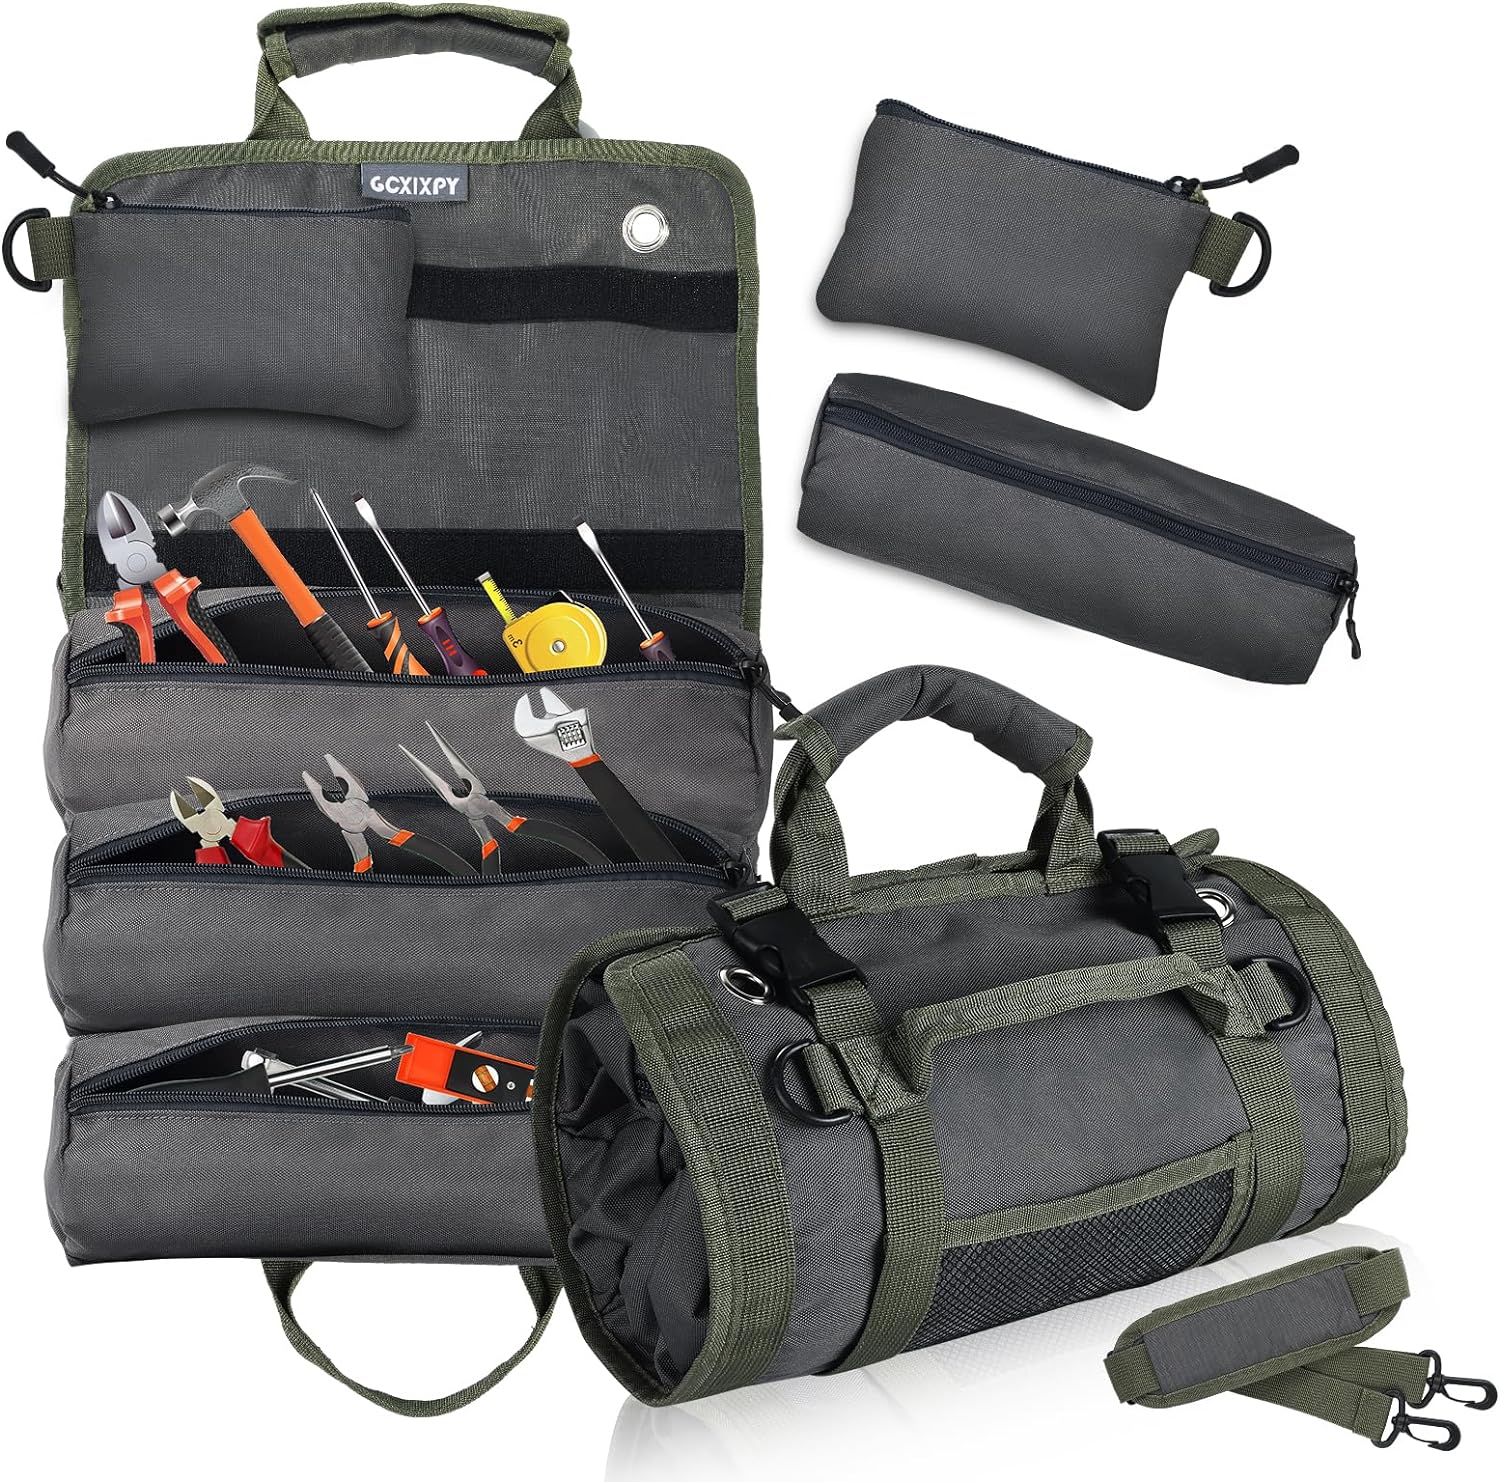 GCXIXPY Roll Up Tool Bag Organizer and Storage Review - Best Tool Reviews